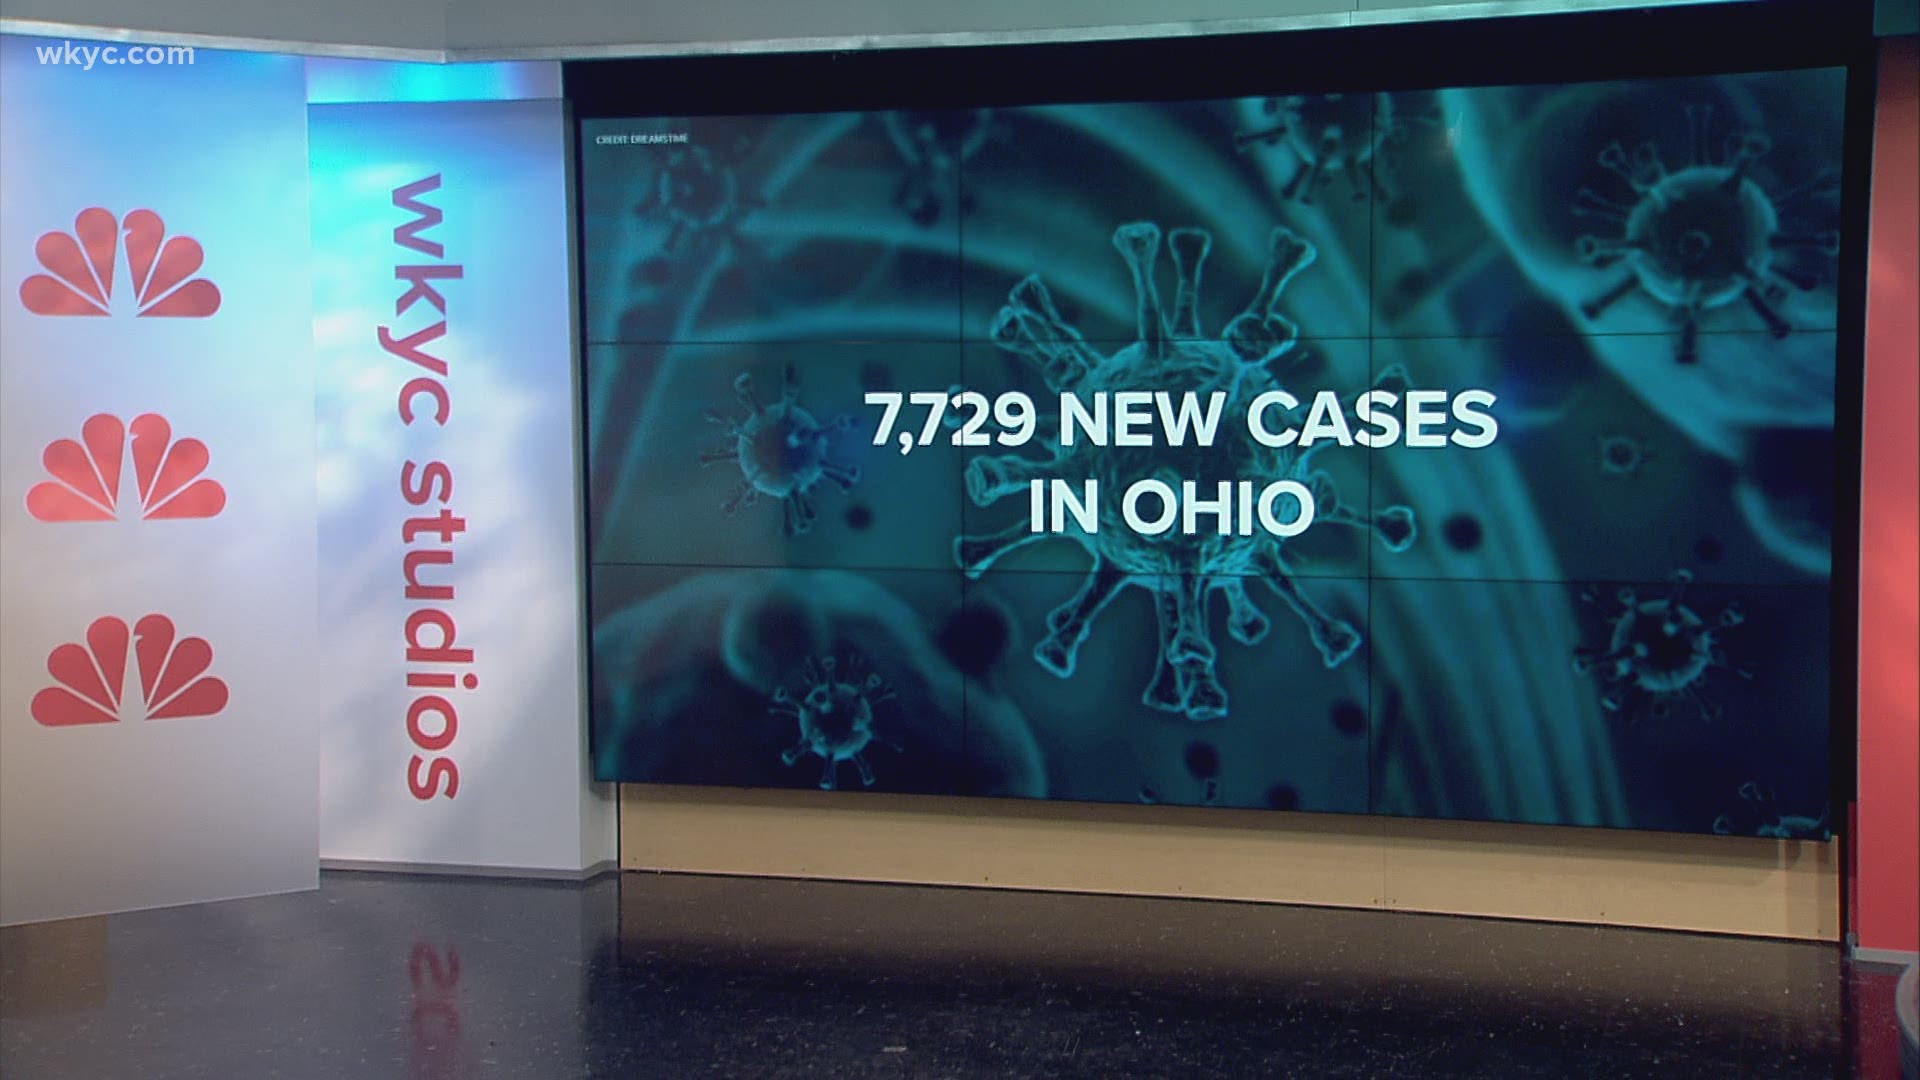 The state reported more than 7,000 new Coronavirus cases on Sunday, down slightly from the past few days. Plus, Dr. Fauci says he sees "surge upon surge" coming.